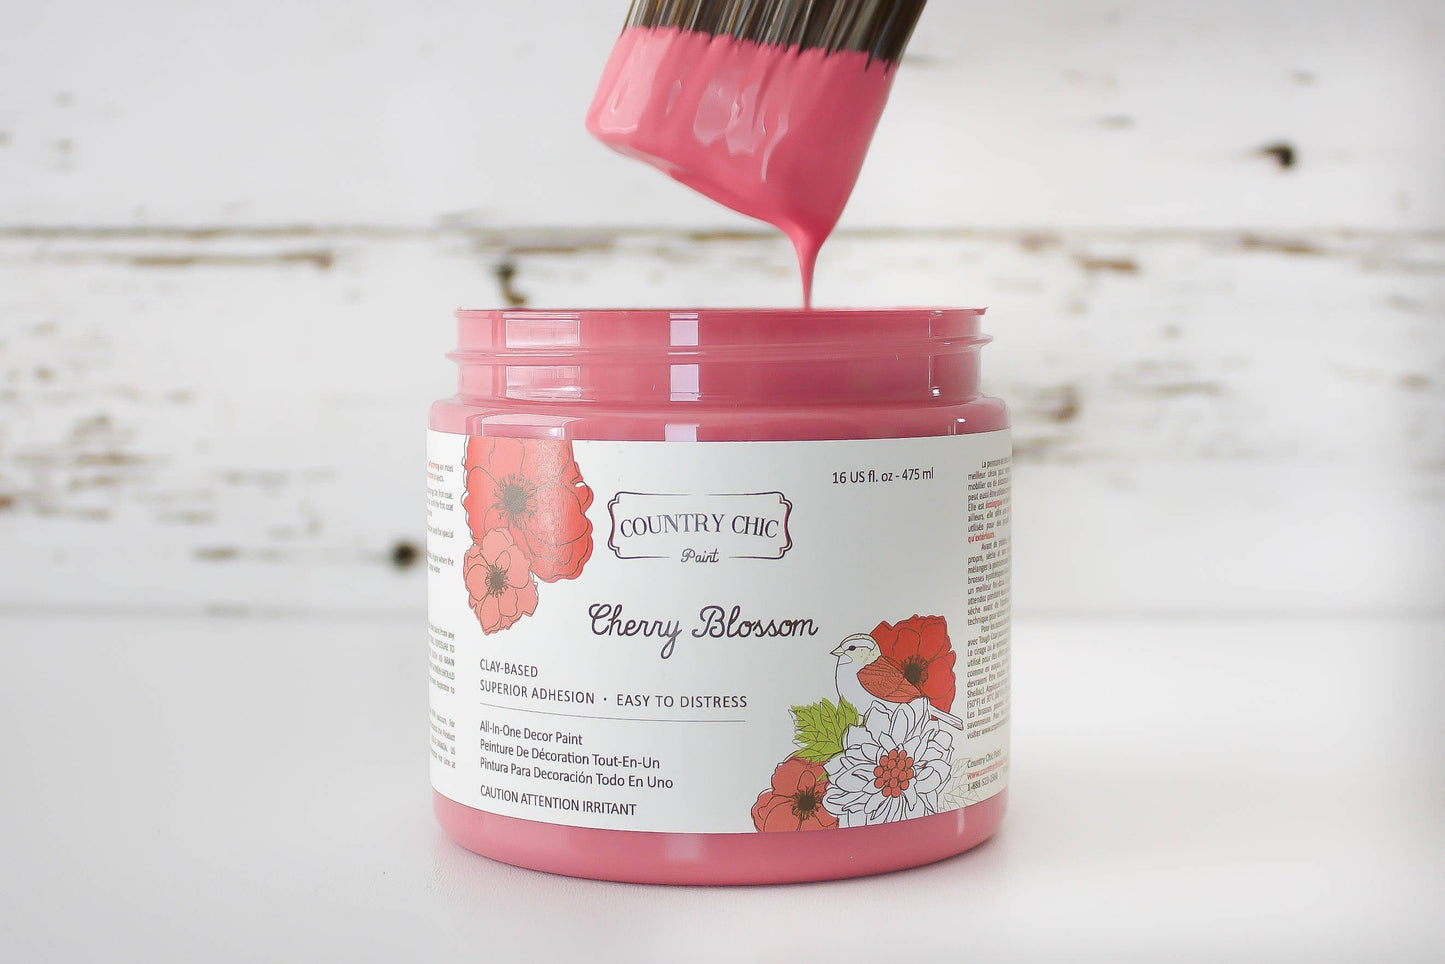 All-in-One Decor Paint - Cherry Blossom*